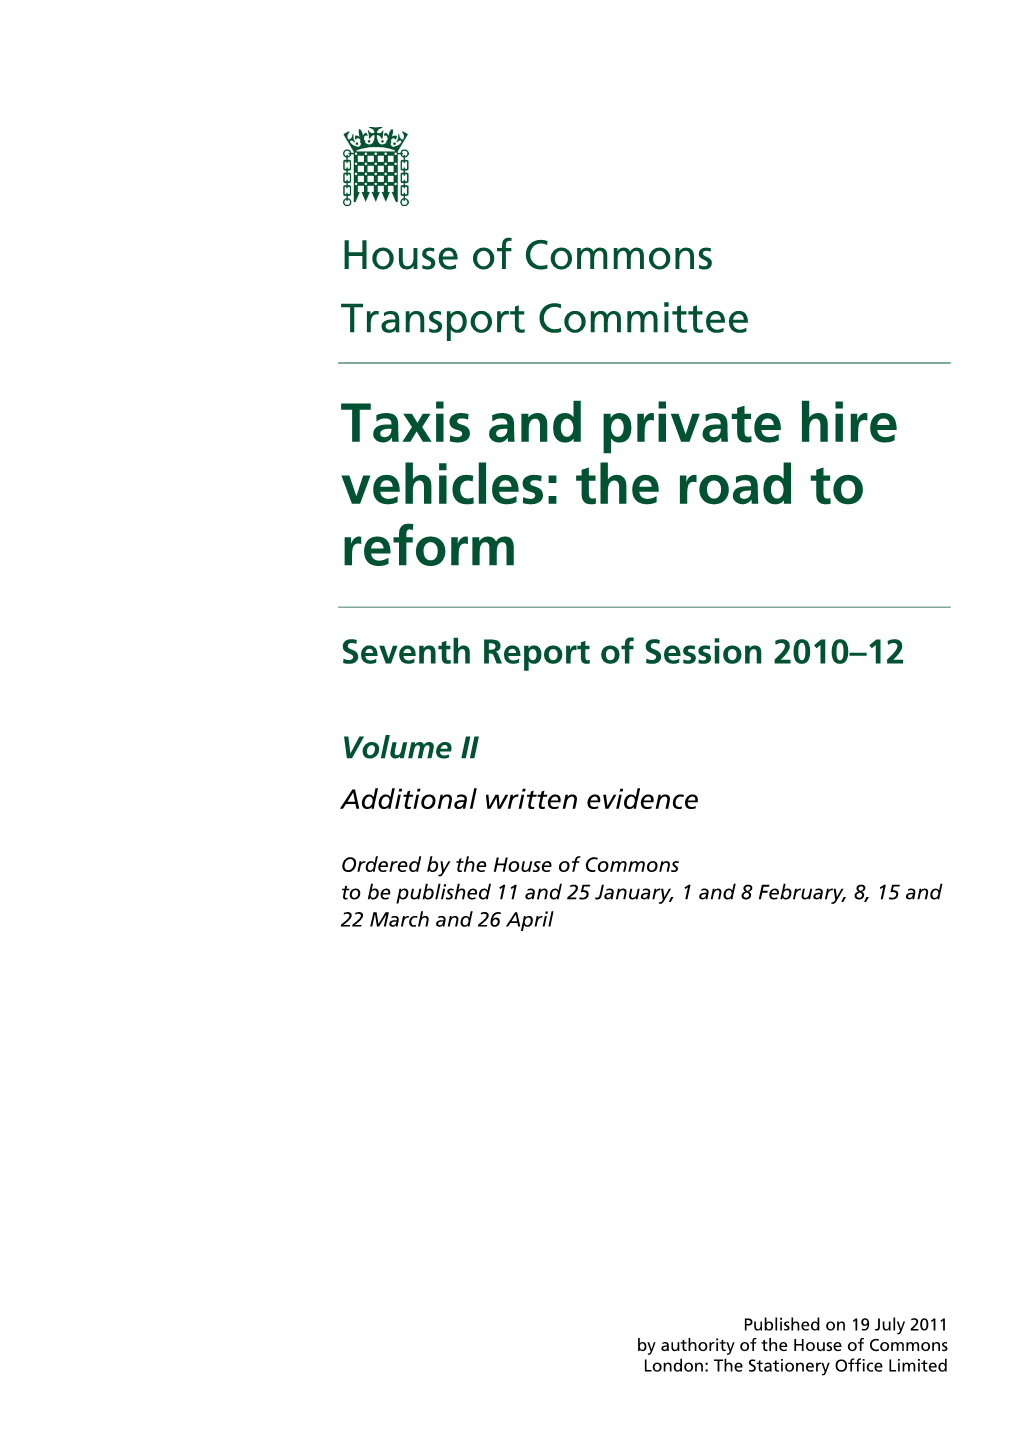 Taxis and Private Hire Vehicles: the Road to Reform